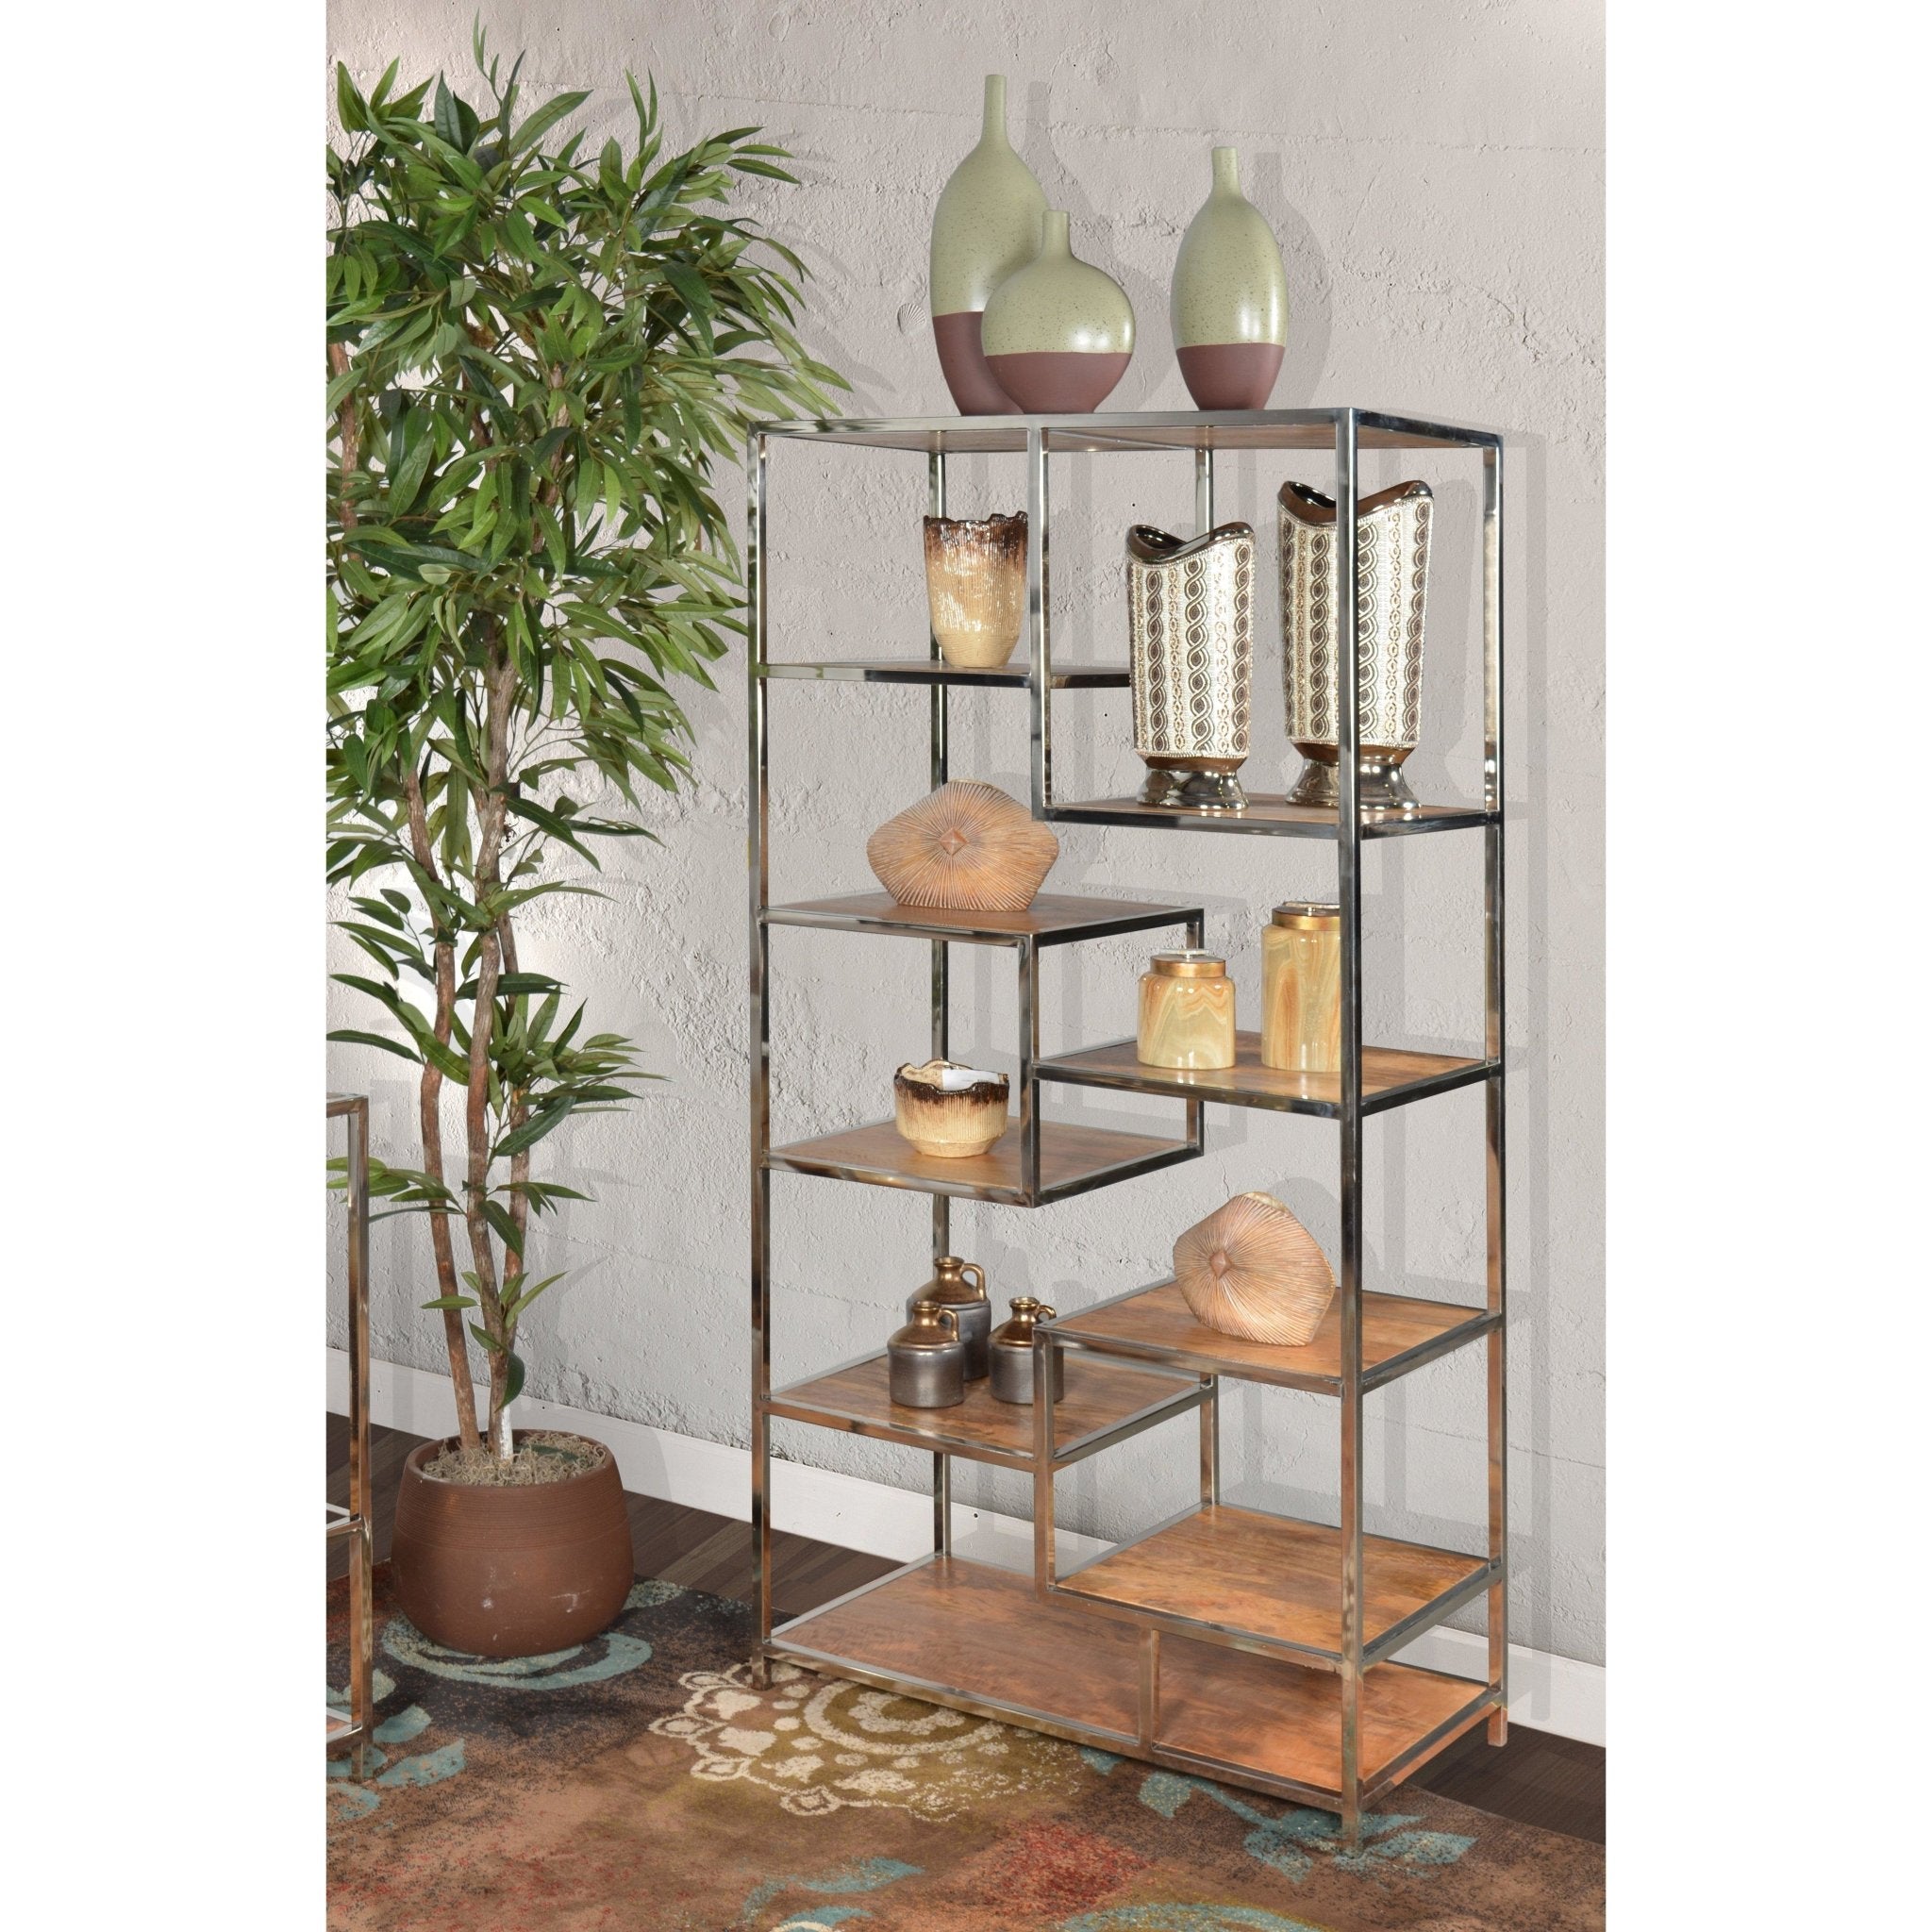 AFD Home Allazzo 72 Inch Etagere Pier Unit Stainless Steel Mango Wood Natural Finish - New Star Living